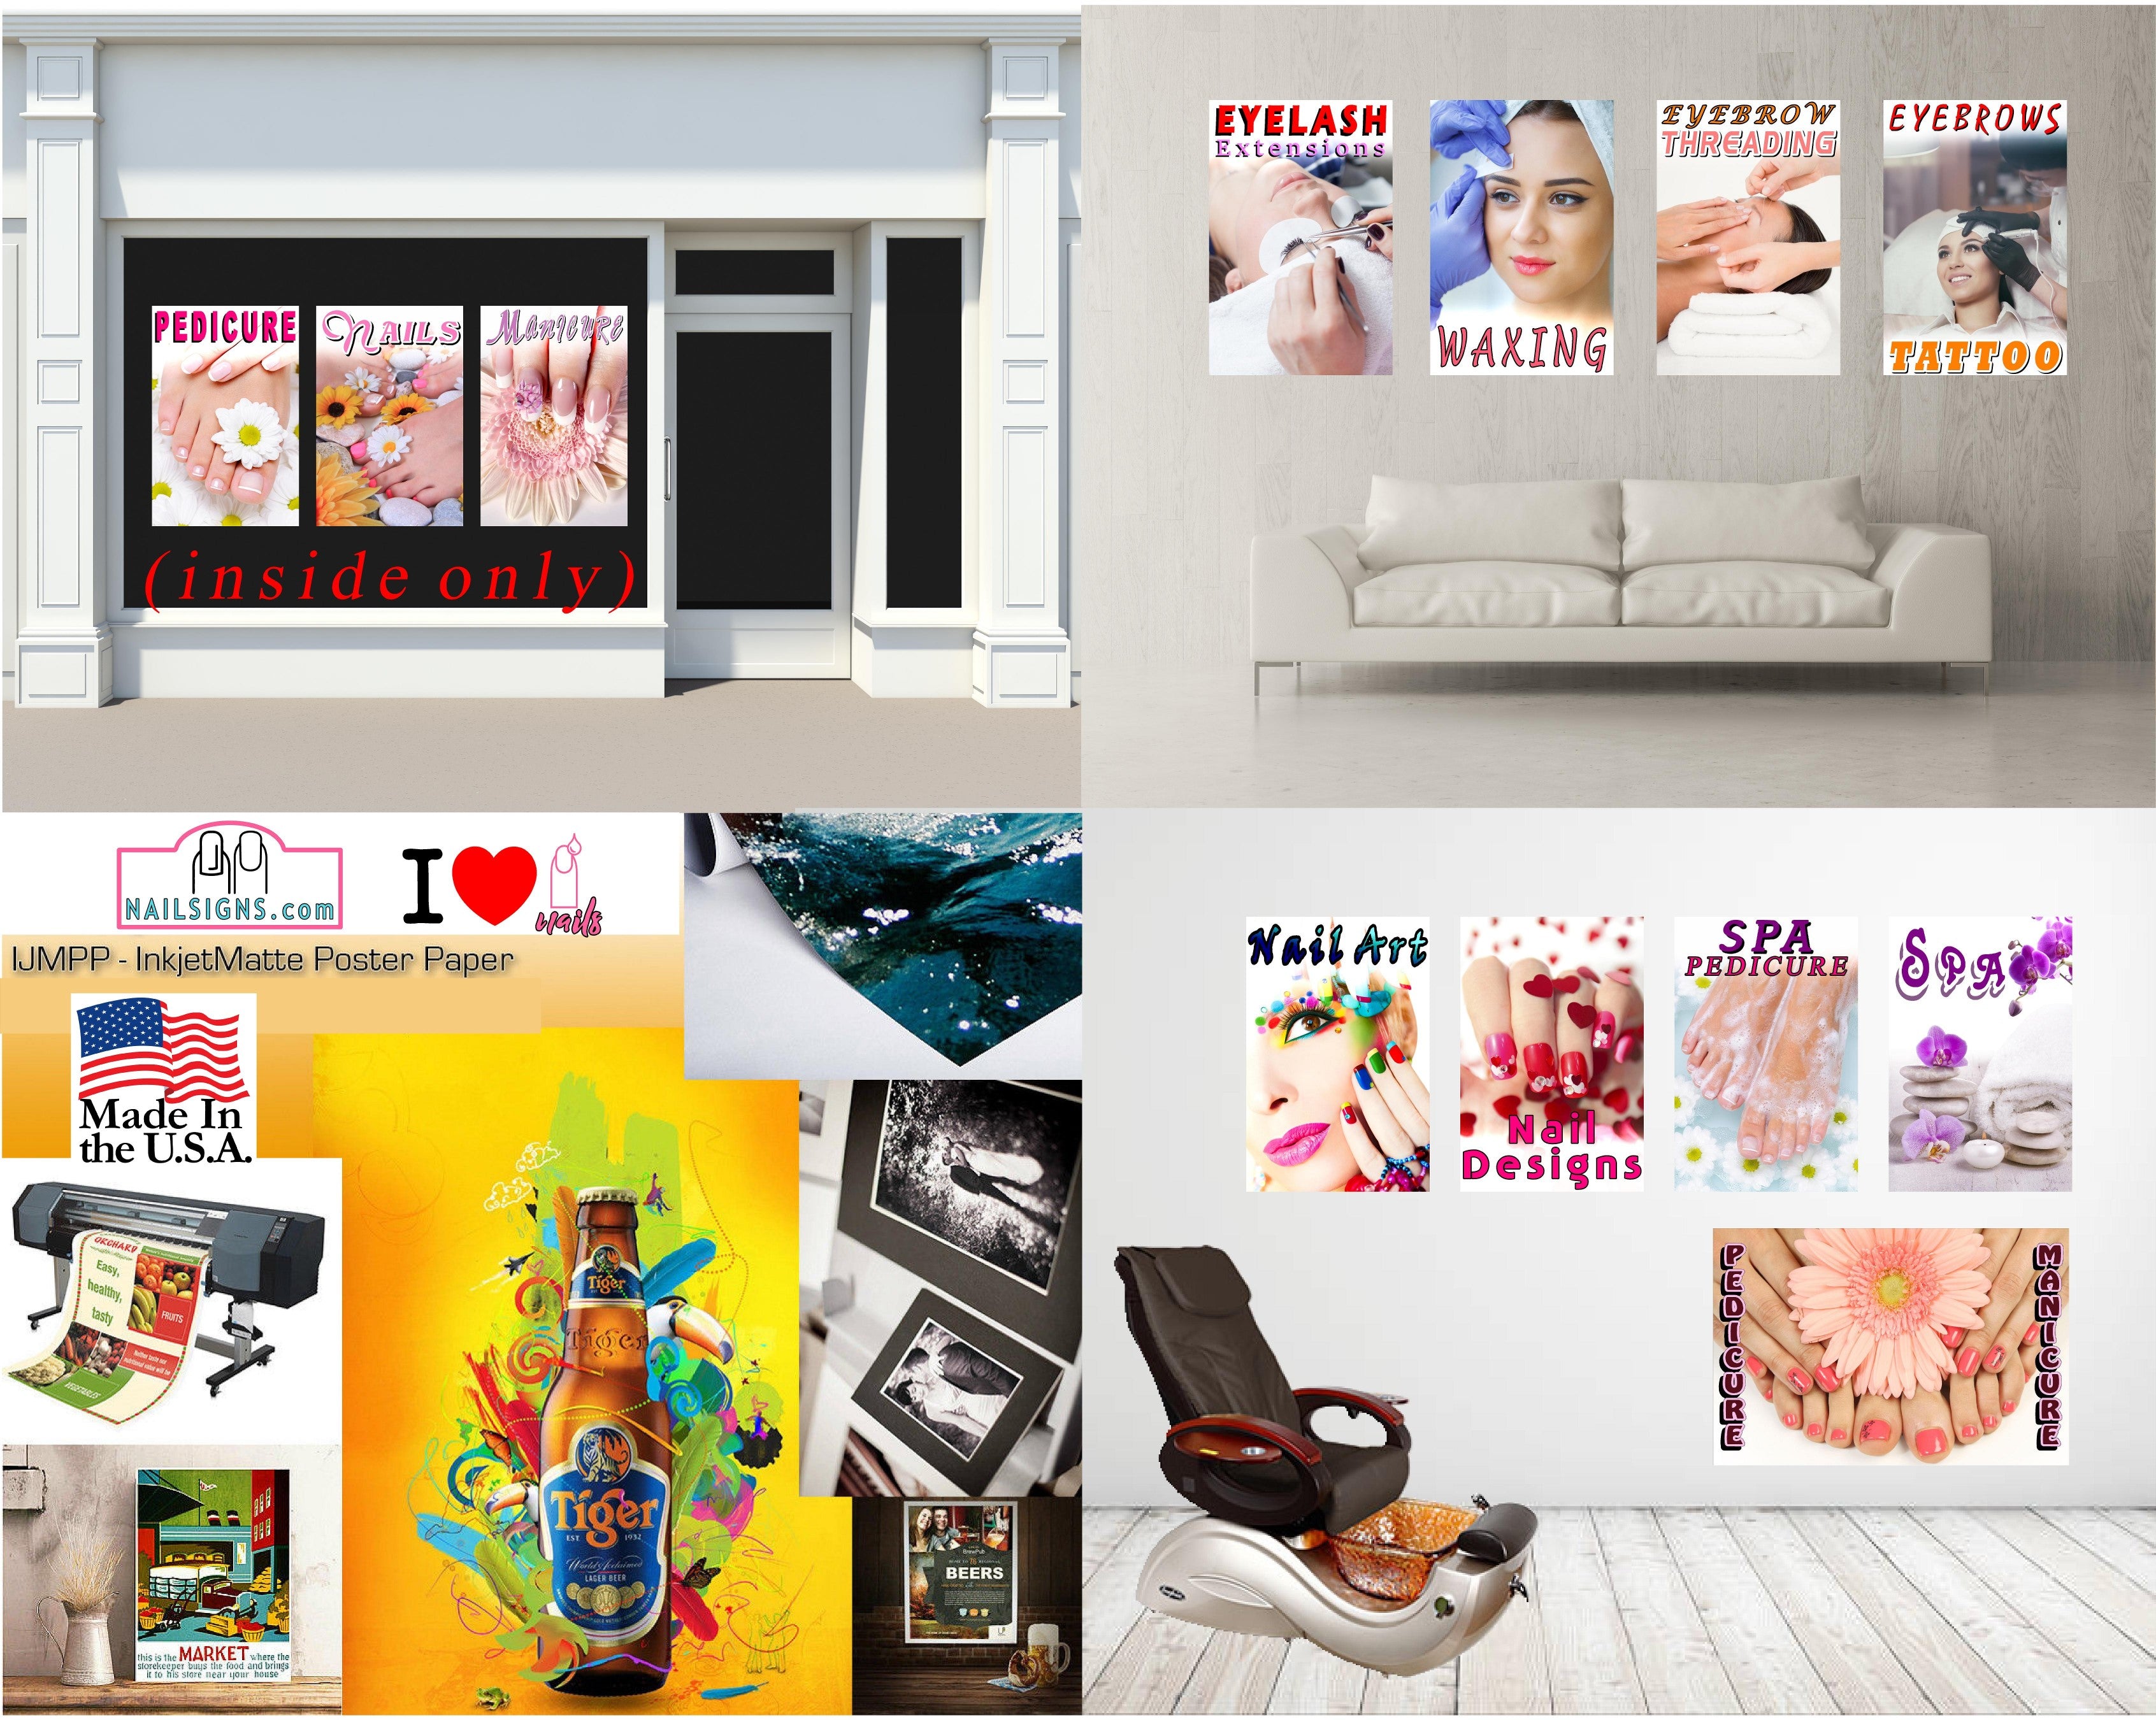 Skin Care 06 Photo-Realistic Paper Poster Premium Interior Inside Sign Advertising Wall Window Non-Laminated Vertical